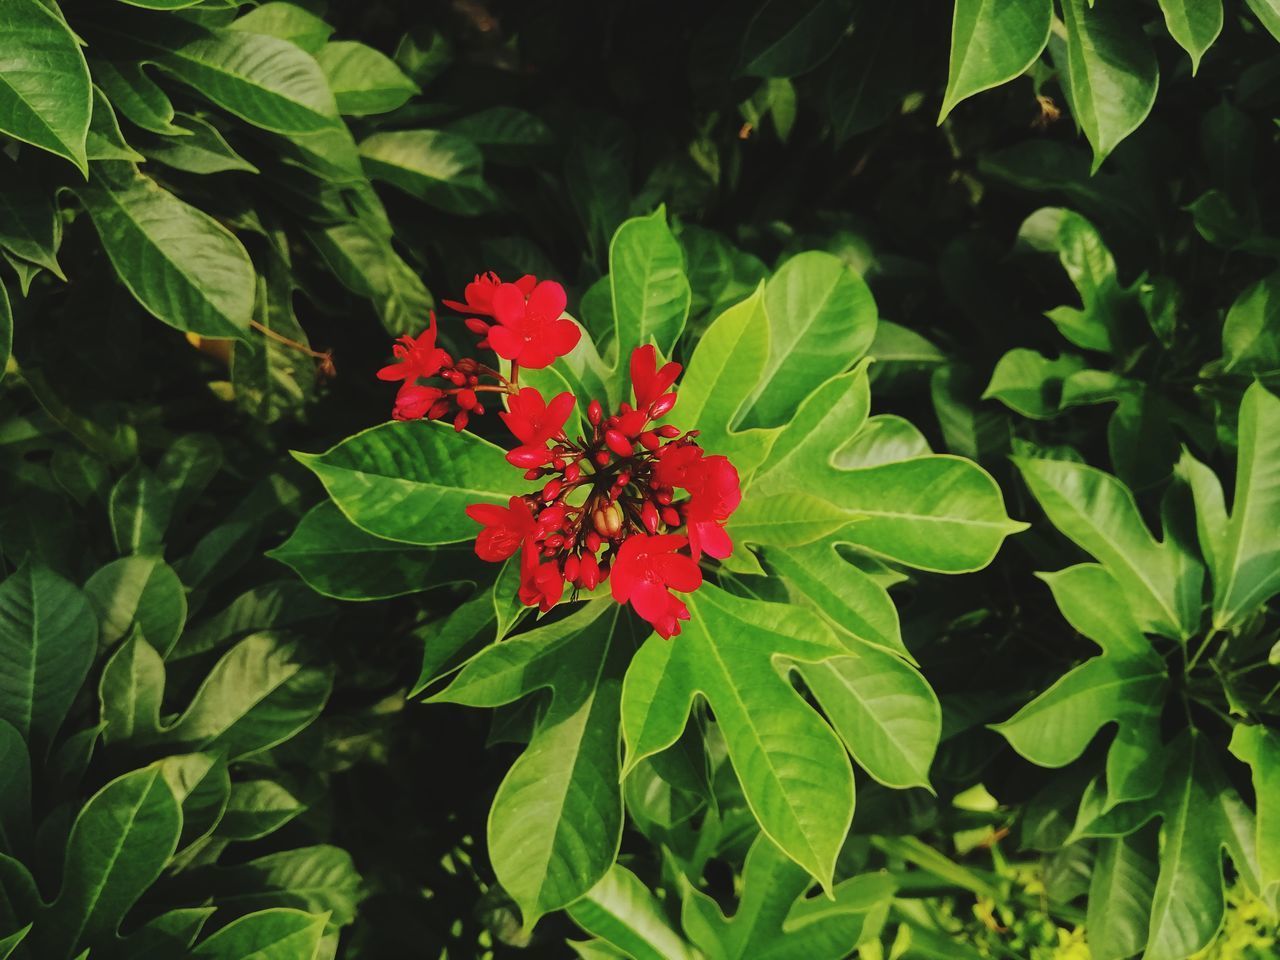 CLOSE-UP OF RED FLOWERING PLANT AGAINST GREEN PLANTS